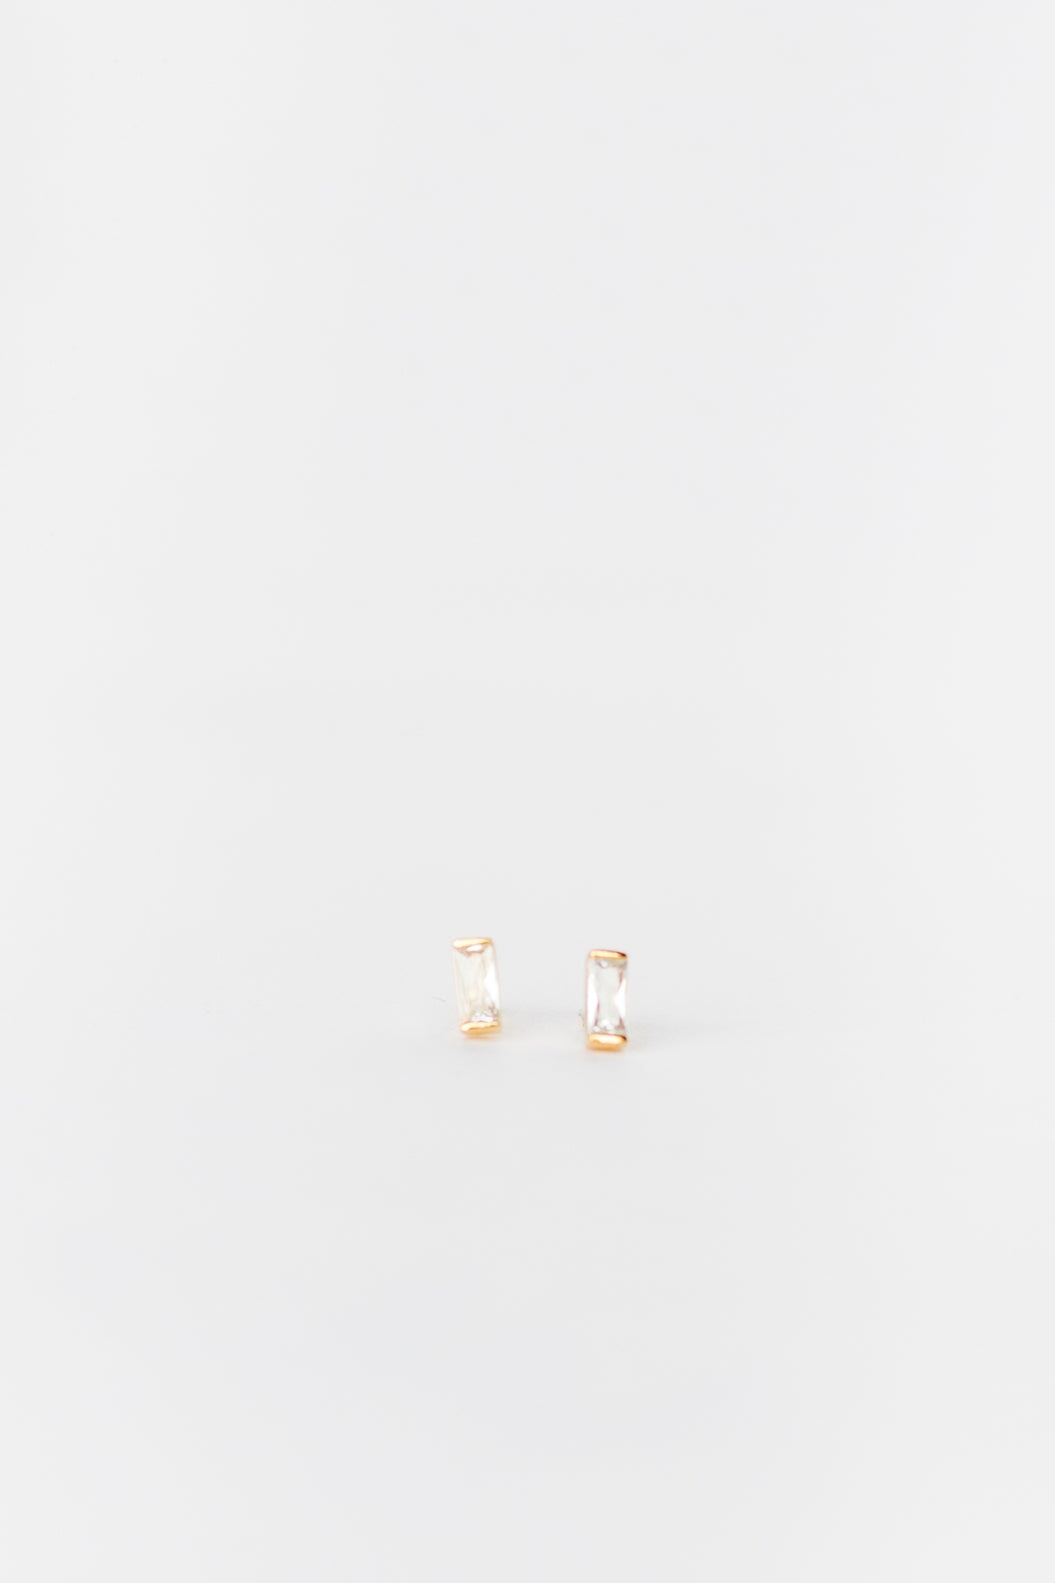 Cove Earrings Dating Rectangle Gold WOMEN'S EARINGS Cove Accessories 